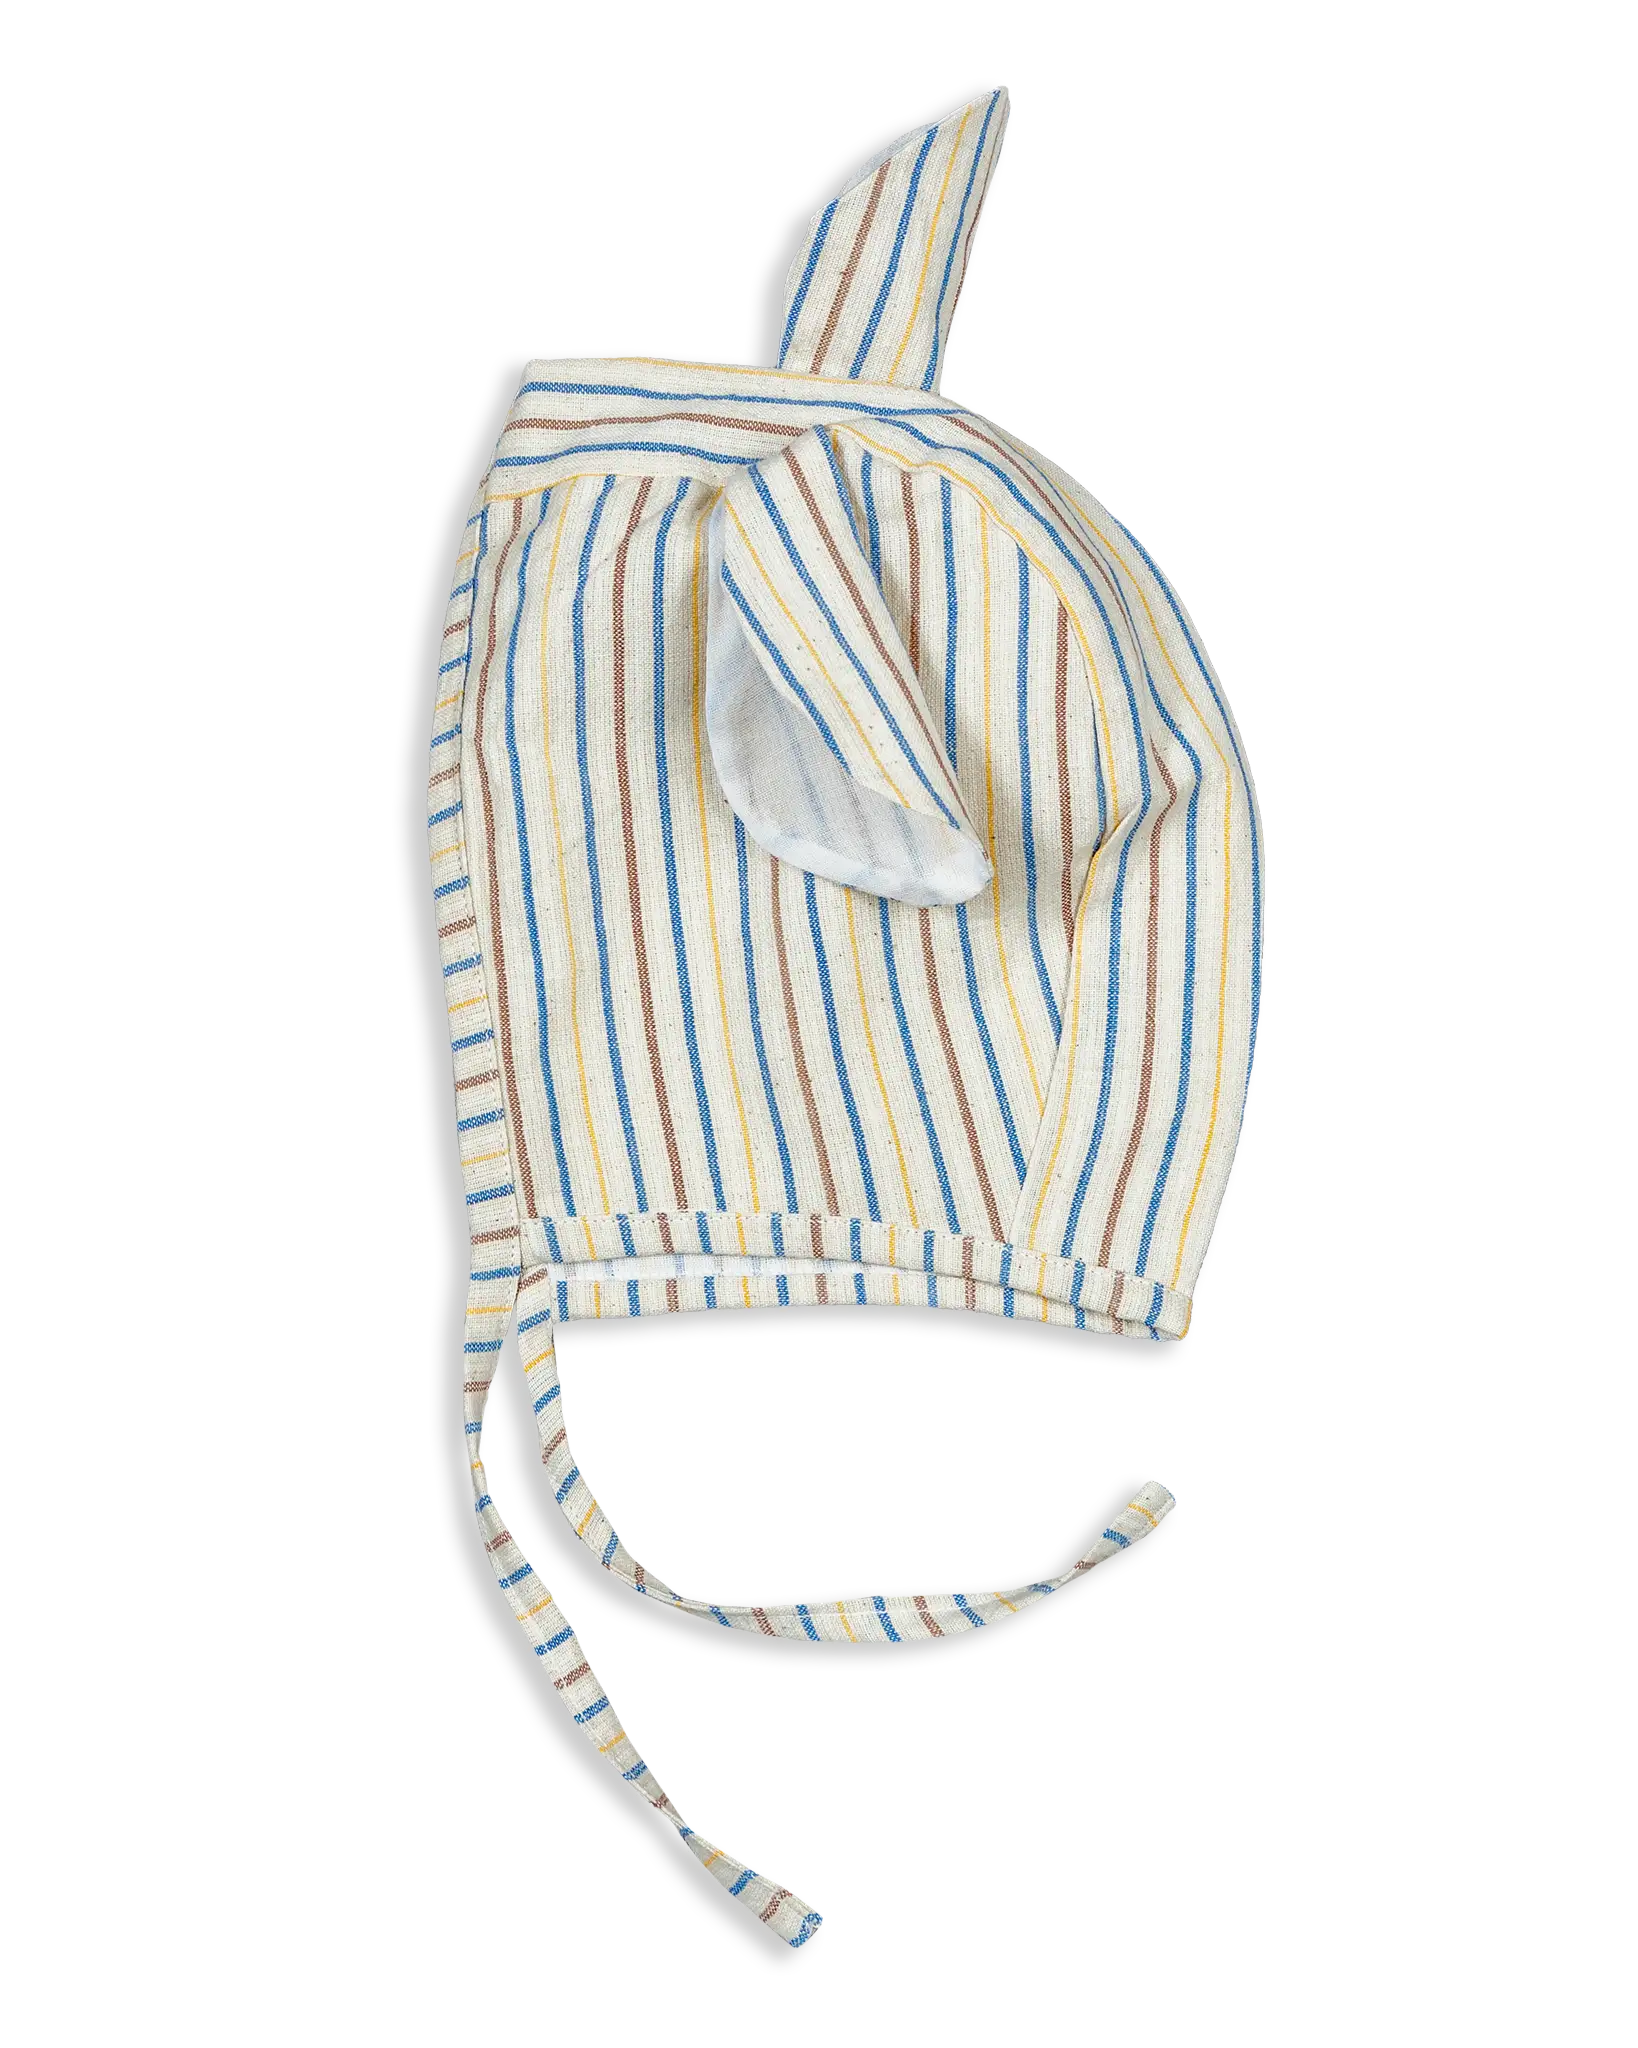 This Bonnet comes in different designs like Bear ears. Our signature striped woven cotton is lined with plain-woven fabric in either blue or pink shades.